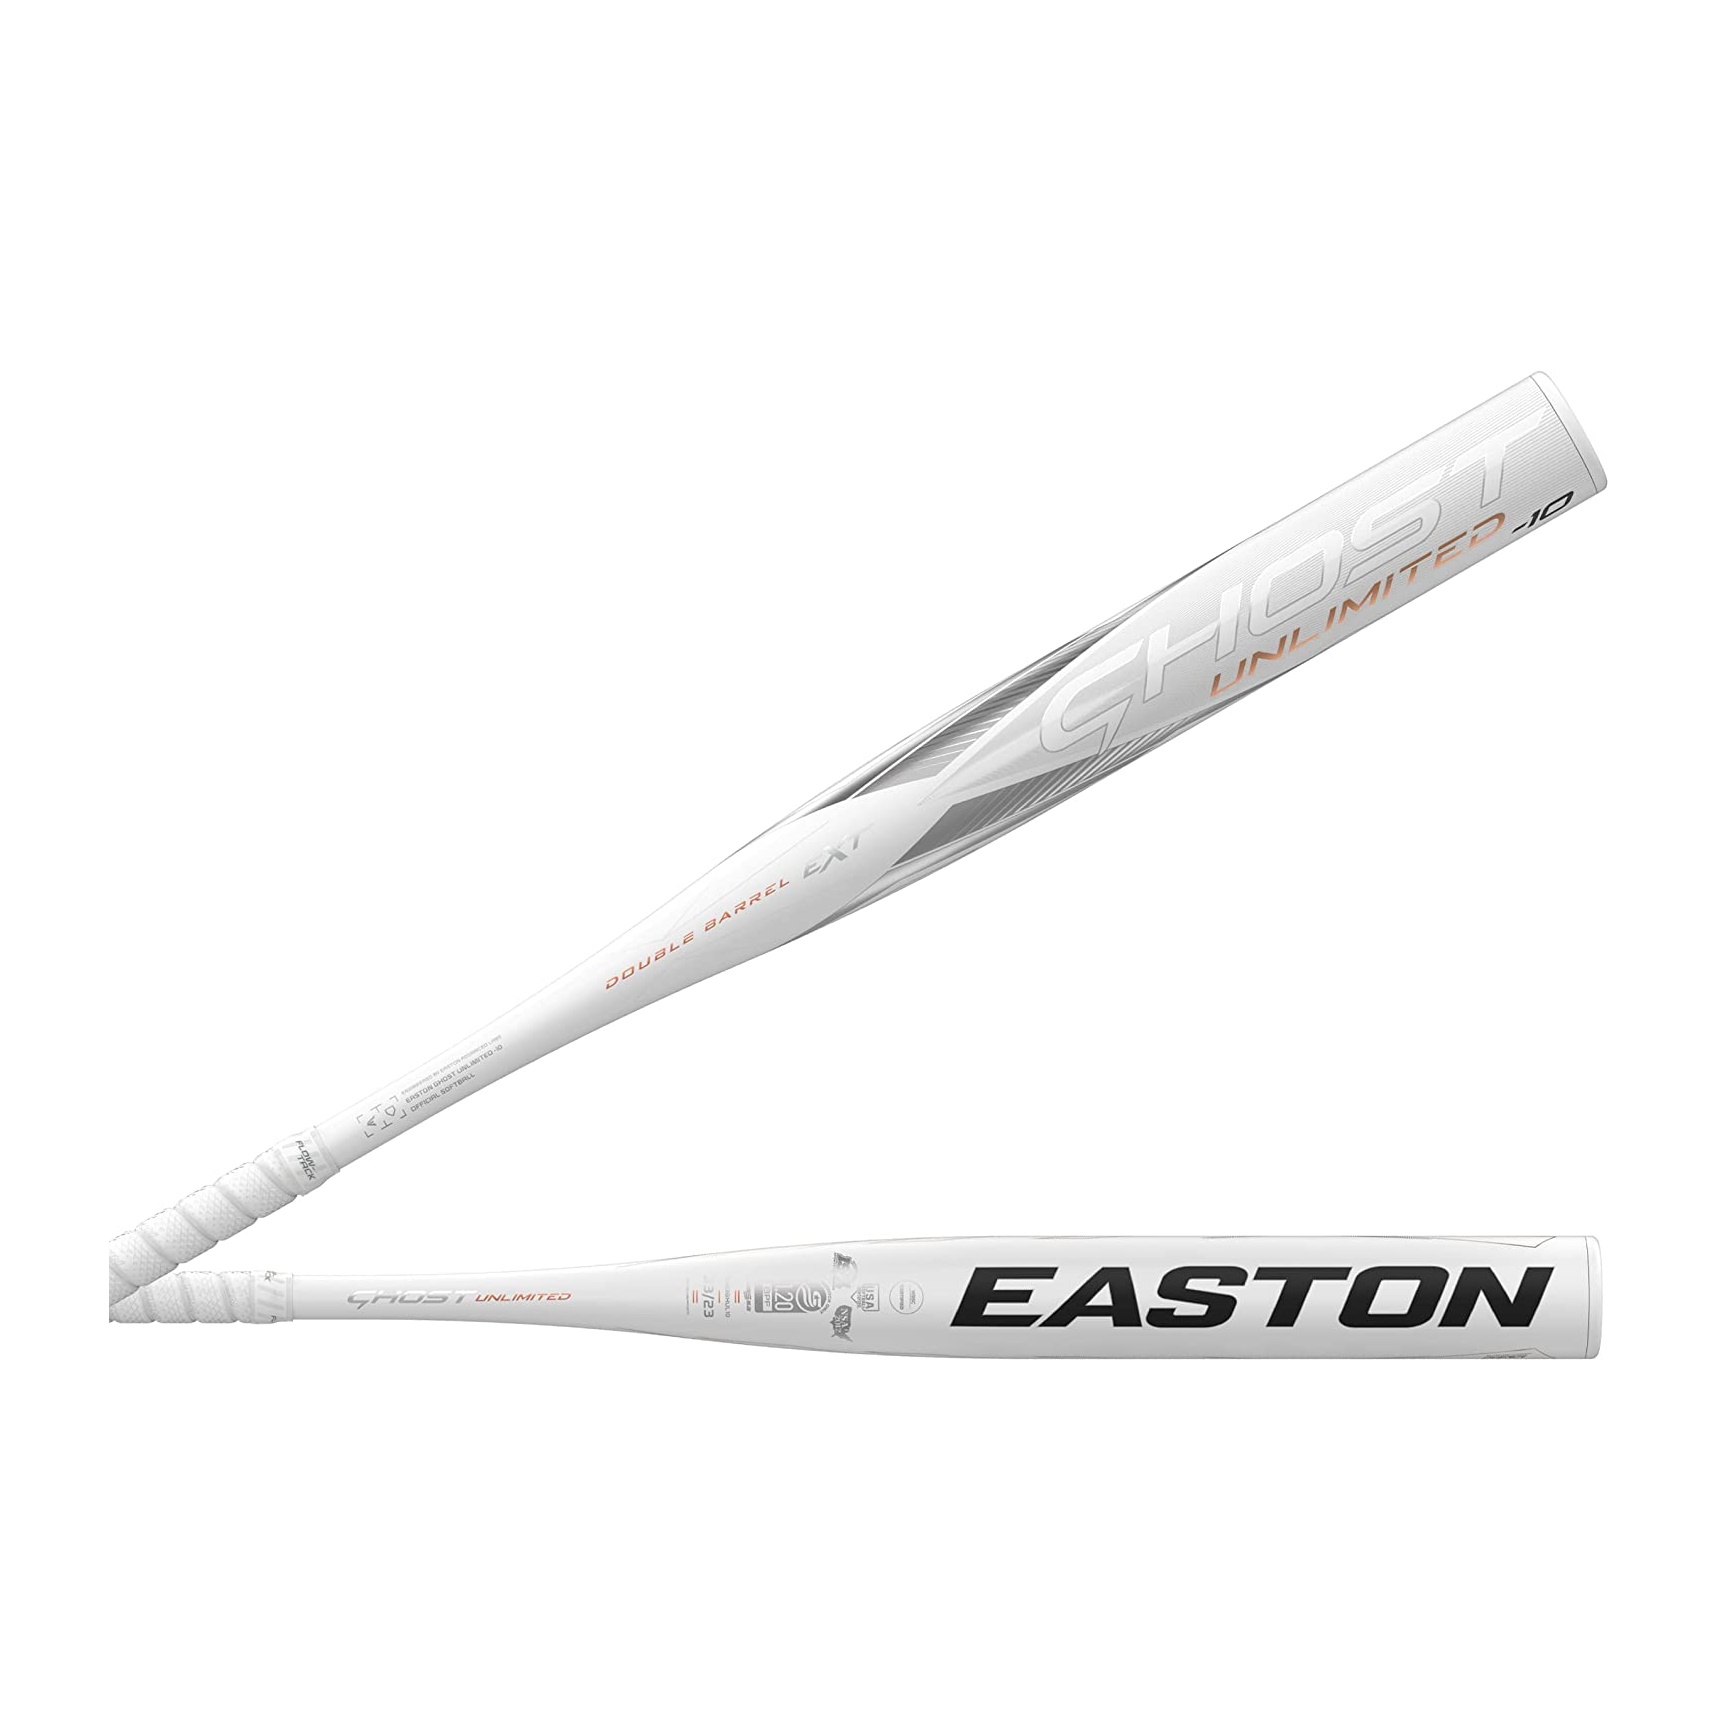 easton-ghost-unlimited-fp23ghul-11-fastpitch-softball-bat-31-inch-20-oz FP23GHUL11-3120 Easton 628412416099 Introducing the Easton Ghost Unlimited Fastpitch Softball Bat a true game-changer